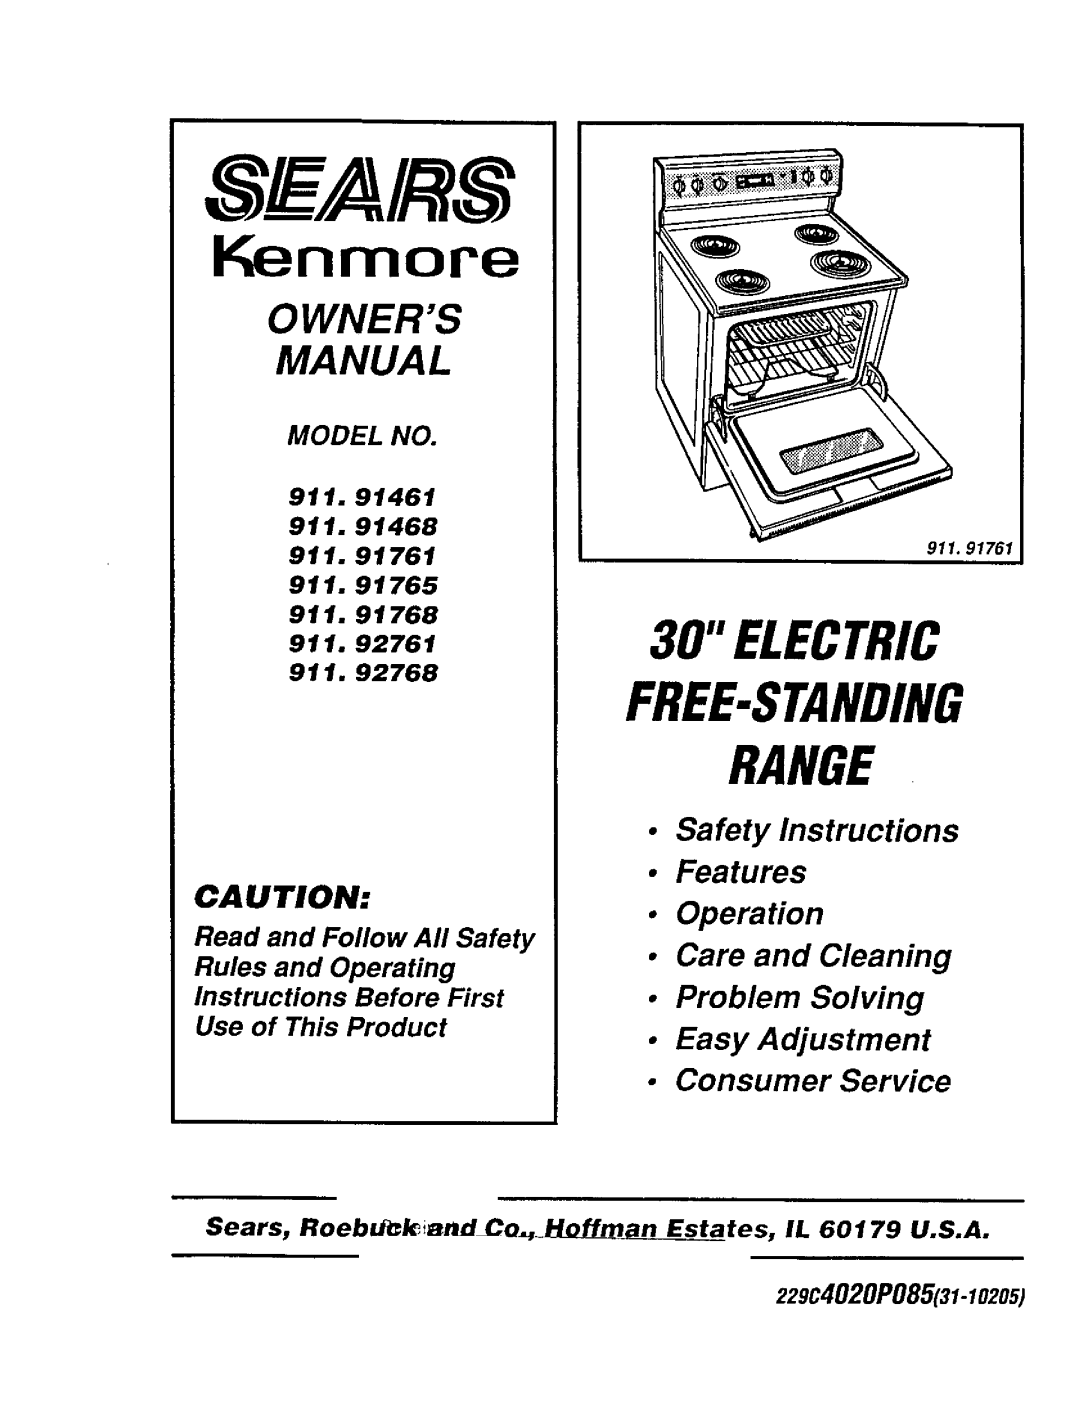 Sears 911.91765 owner manual Kenmore, Electric Free-Standingrange, Safety Instructions Features Operation, Model No 